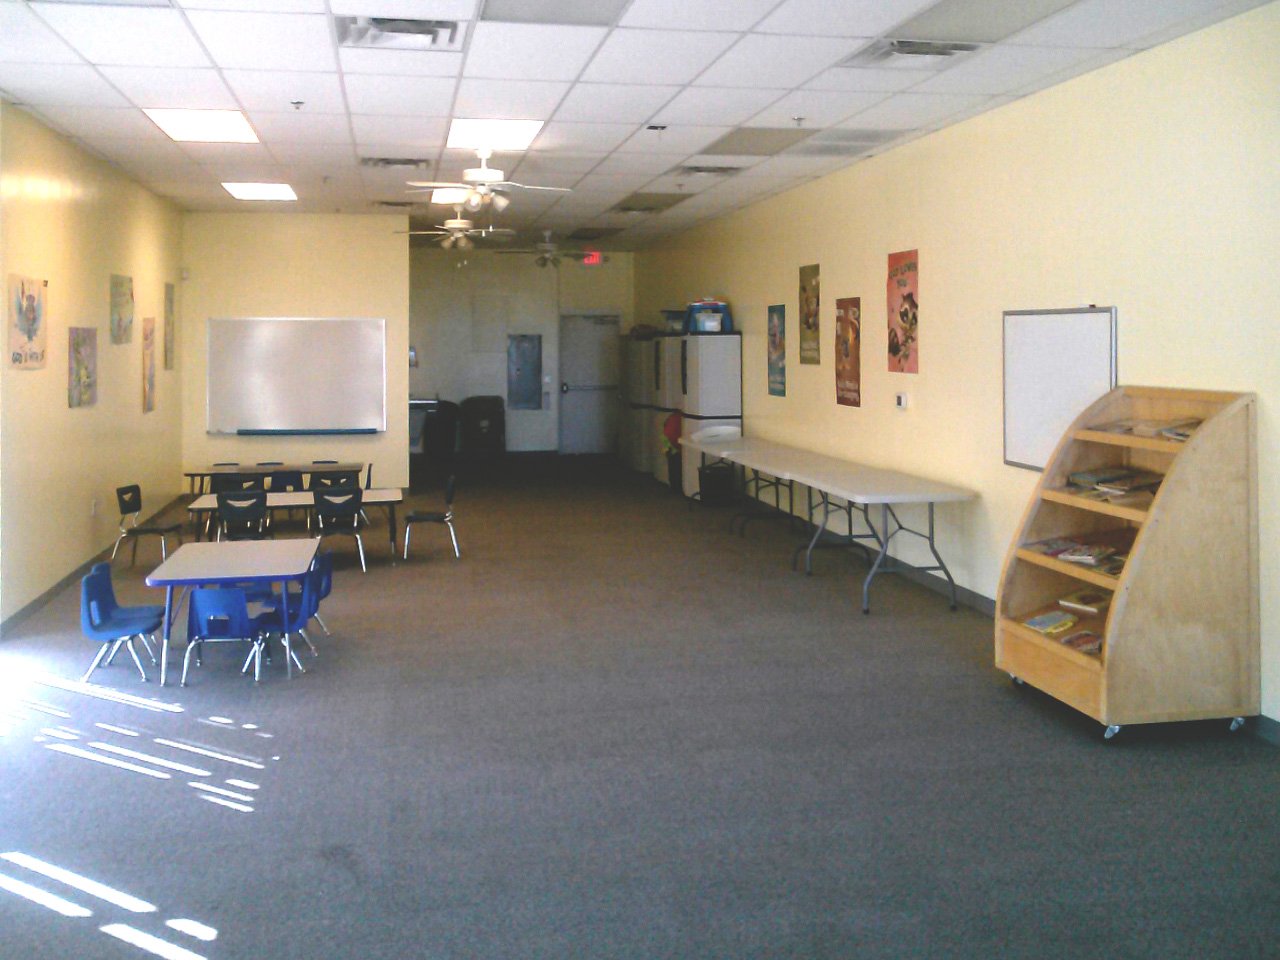 A large room serves as a kitchen and a childcare room in a church